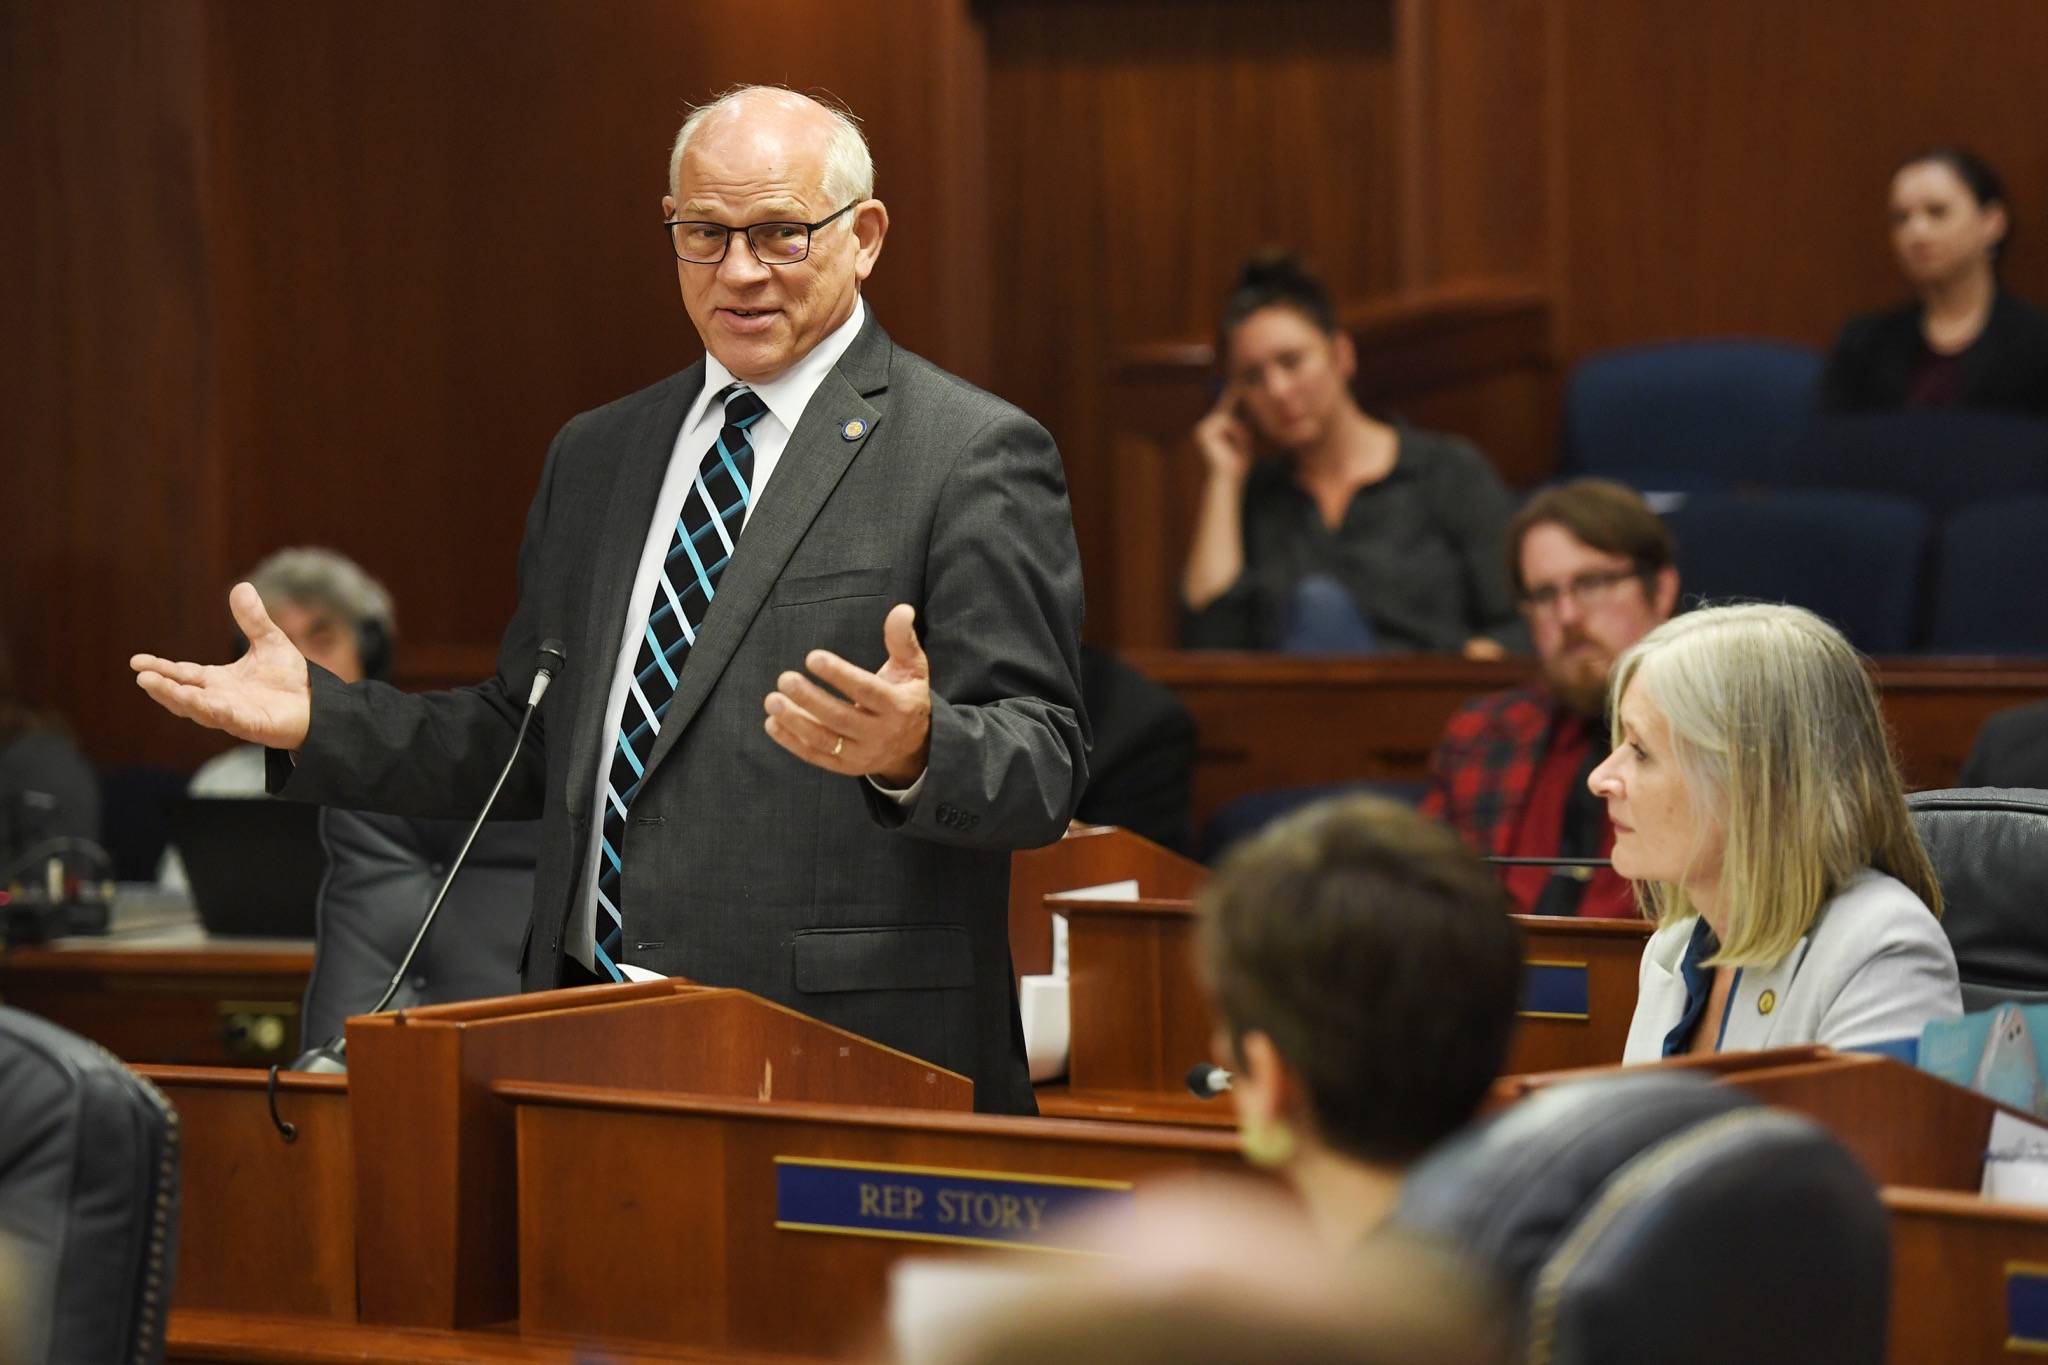 Sen. John Coghill, R-North Pole, expresses his sadness about how Gov. Mike Dunleavy’s budget vetoes will affect his community during a continued Joint Session of the Alaska Legislature at the Capitol on Thursday, July 11, 2019. (Michael Penn | Juneau Empire)